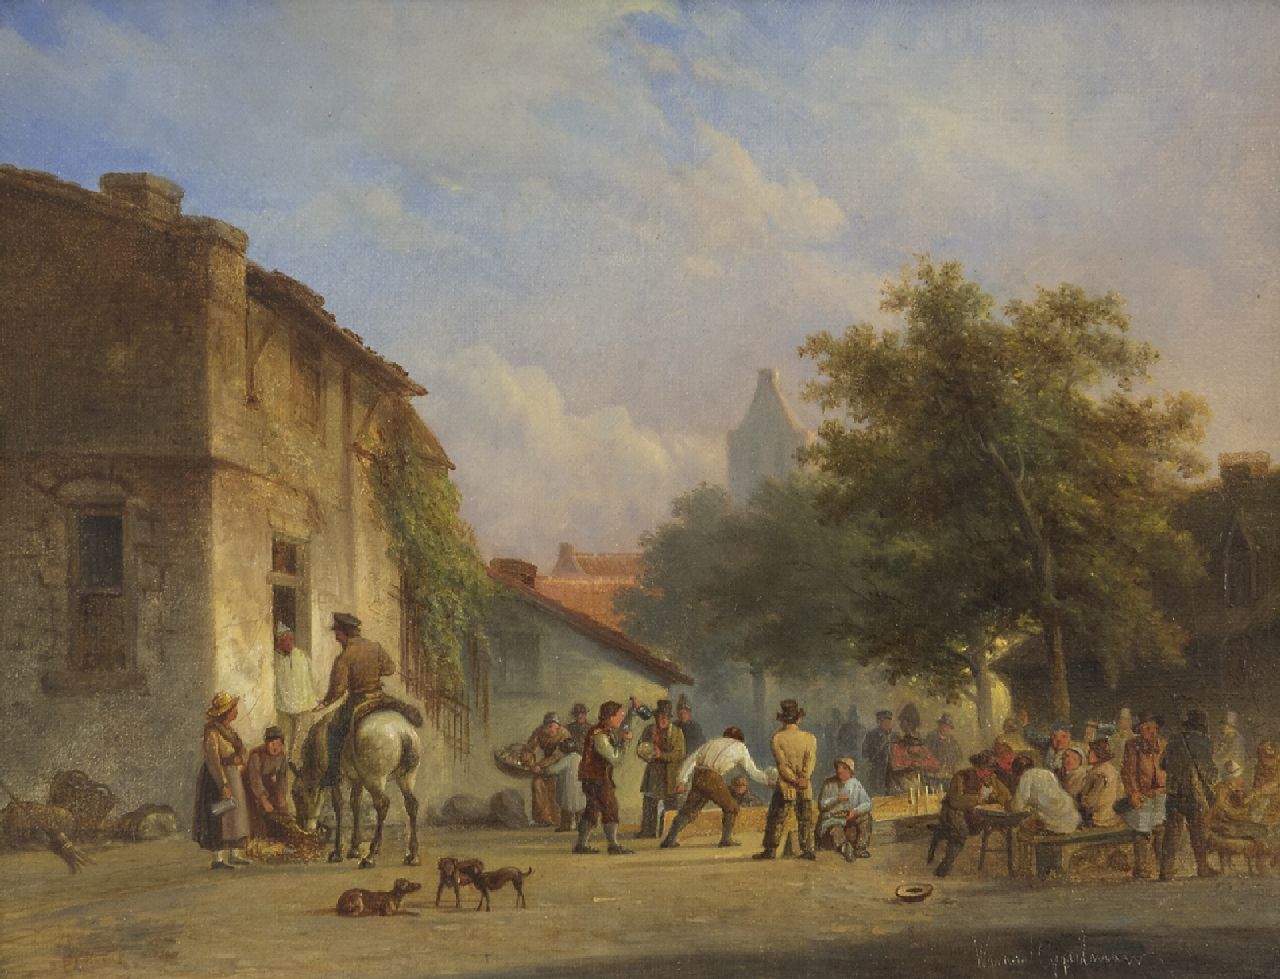 Warner Gijselman | Playing skittles on the village square, oil on canvas, 17.9 x 23.0 cm, signed l.r.